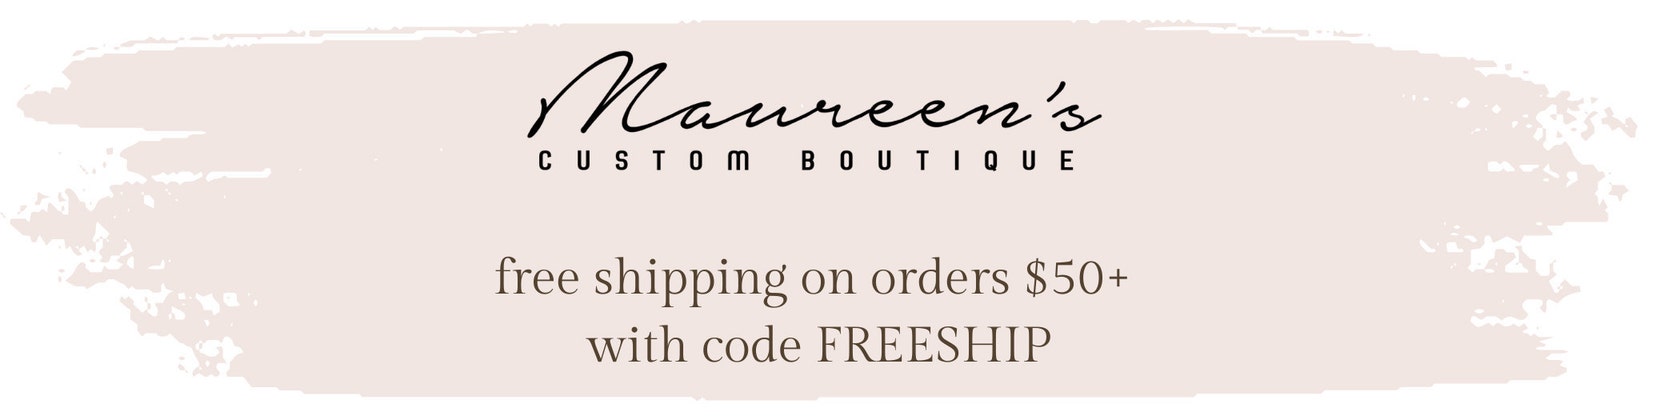 Stanley Name Plate – Maureen's Custom Boutique